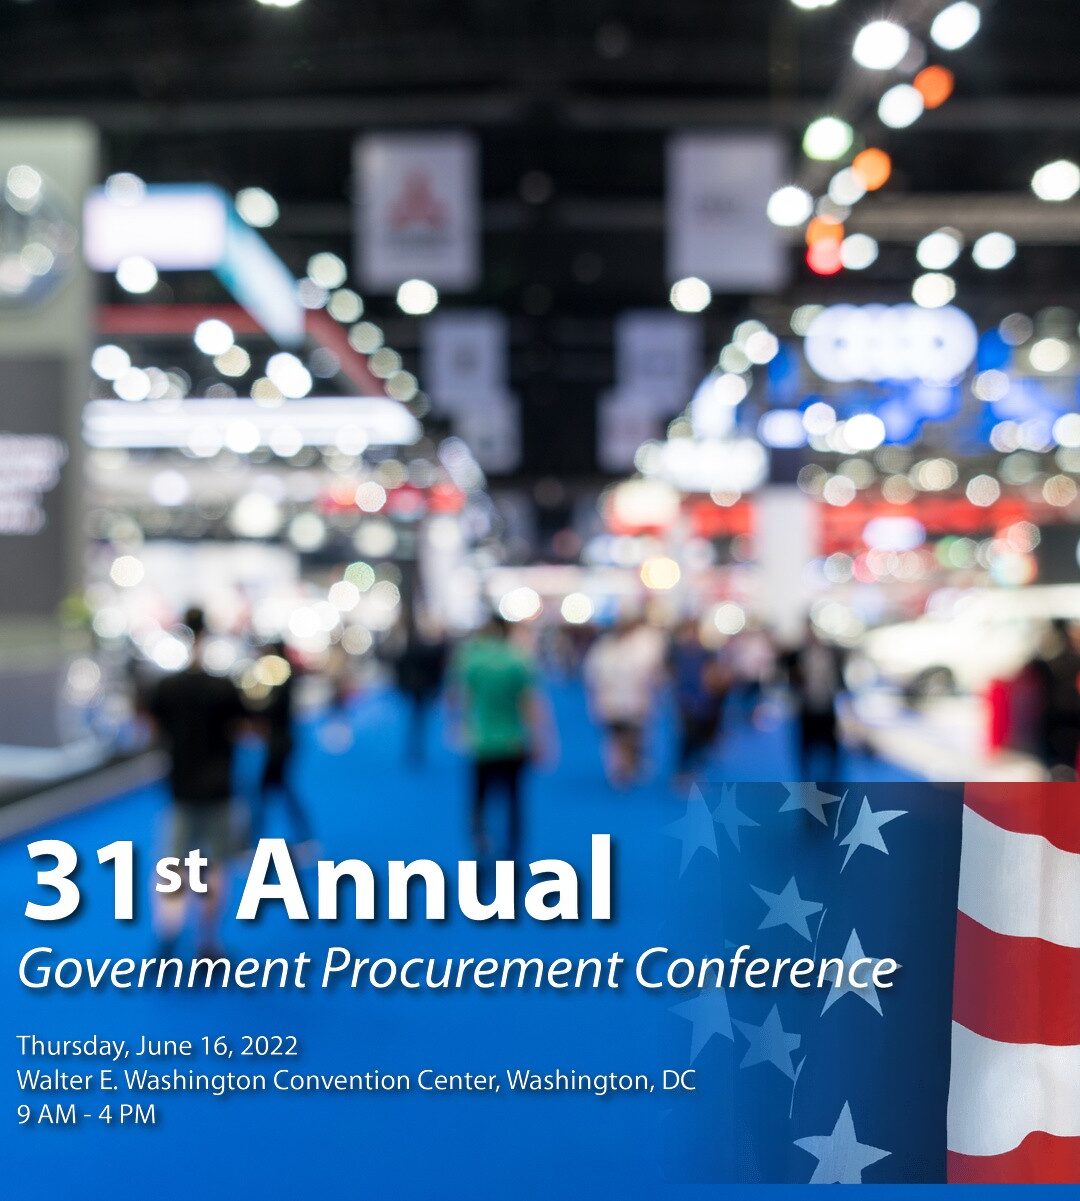 OST Global Solutions Exhibiting at the 31st Annual Government Procurement Conference June 16 photo